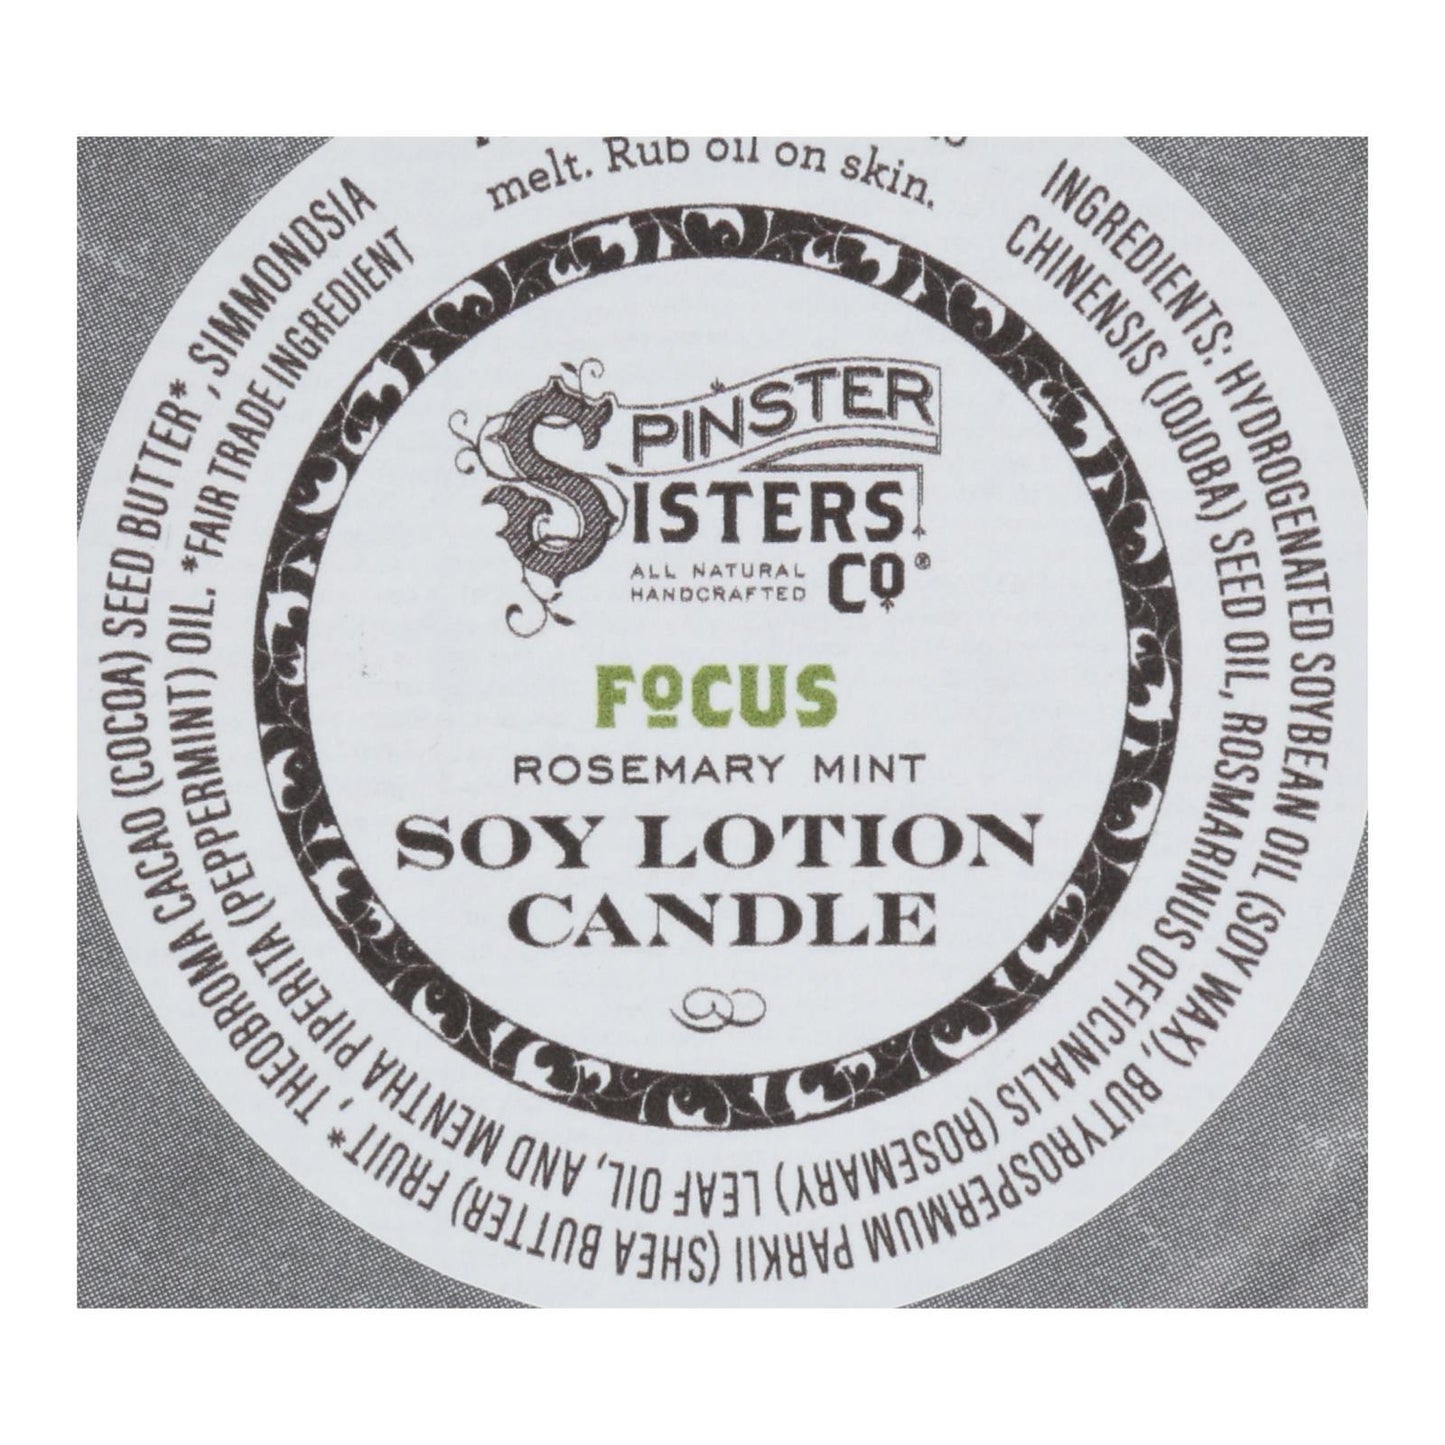 Spinster Sisters Co. - Body Ltn Candle Focus - Case Of 4-6.2 Oz - Loomini